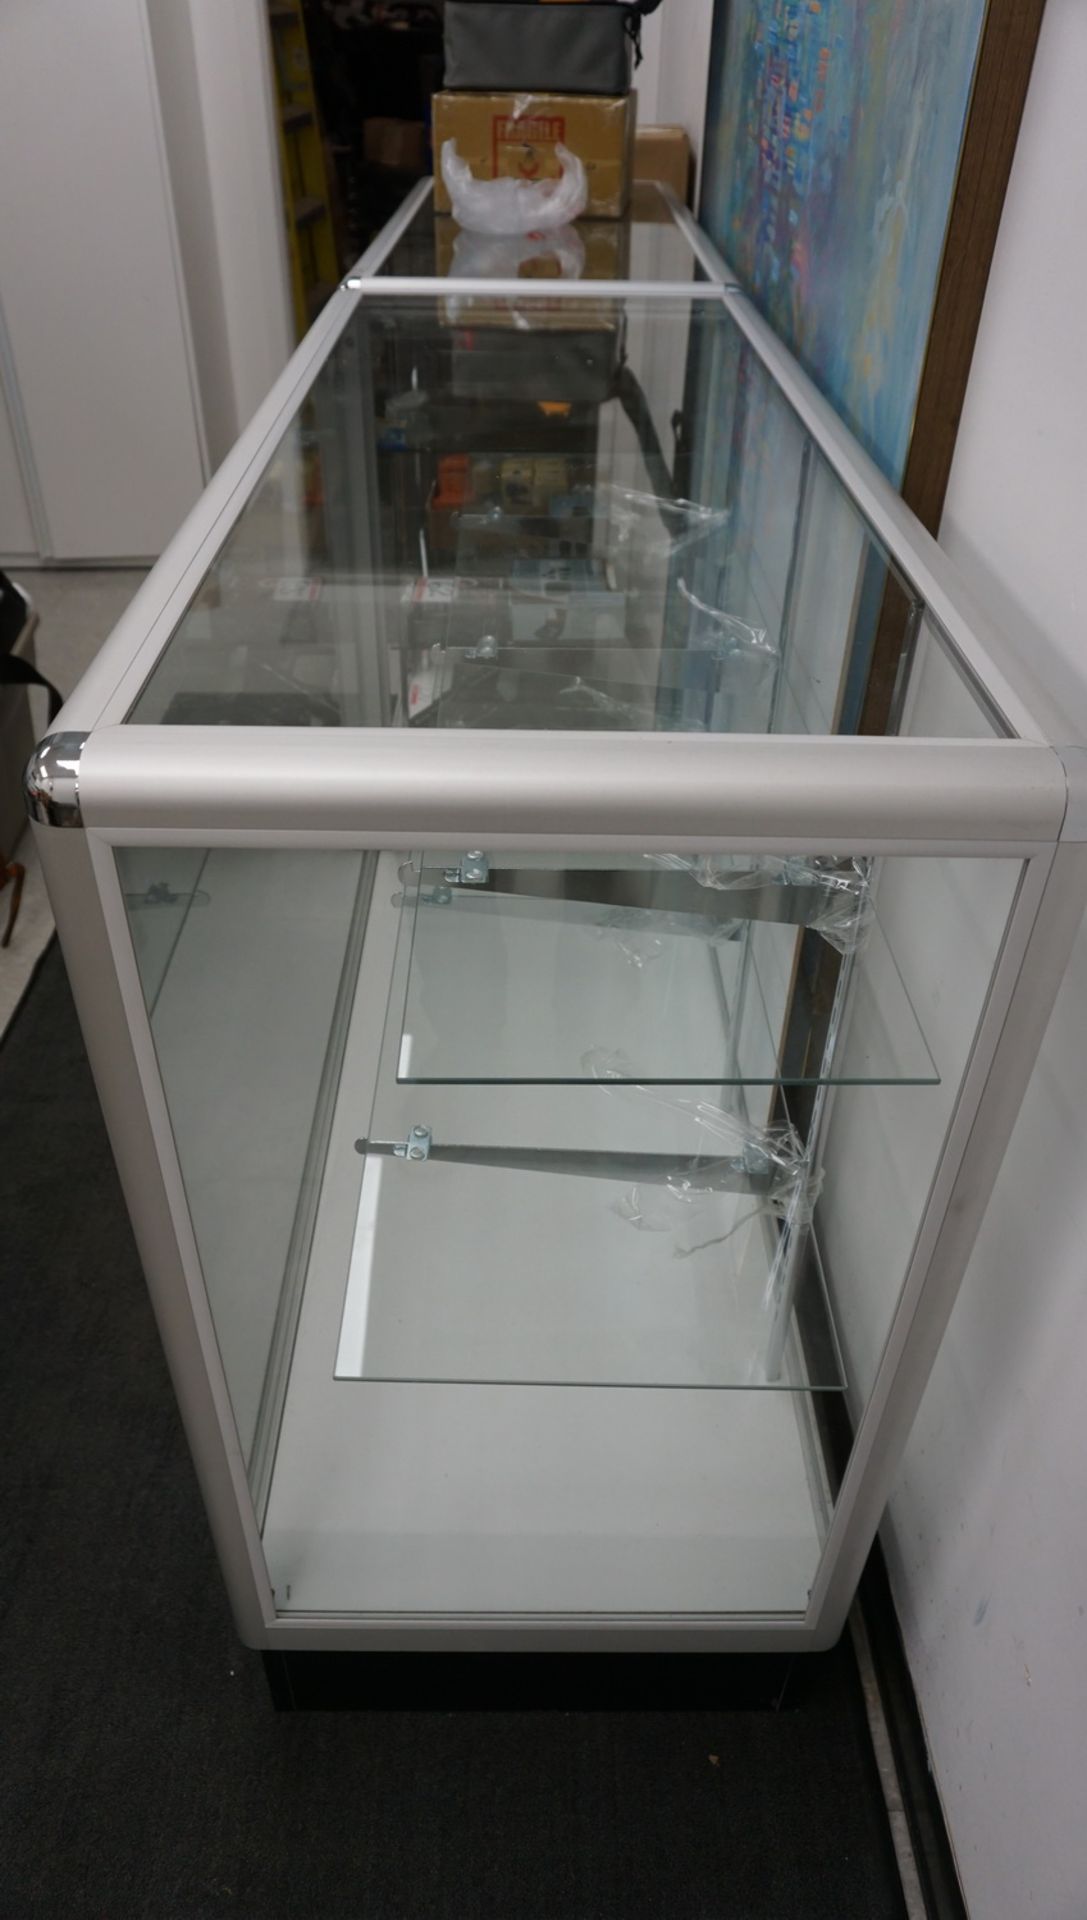 ALUMINUM FRAME & GLASS RETAIL DISPLAY SHOWCASE CABINET - 48"W X 20"D X 38.5"H (DELAYED PICKUP - - Image 2 of 2